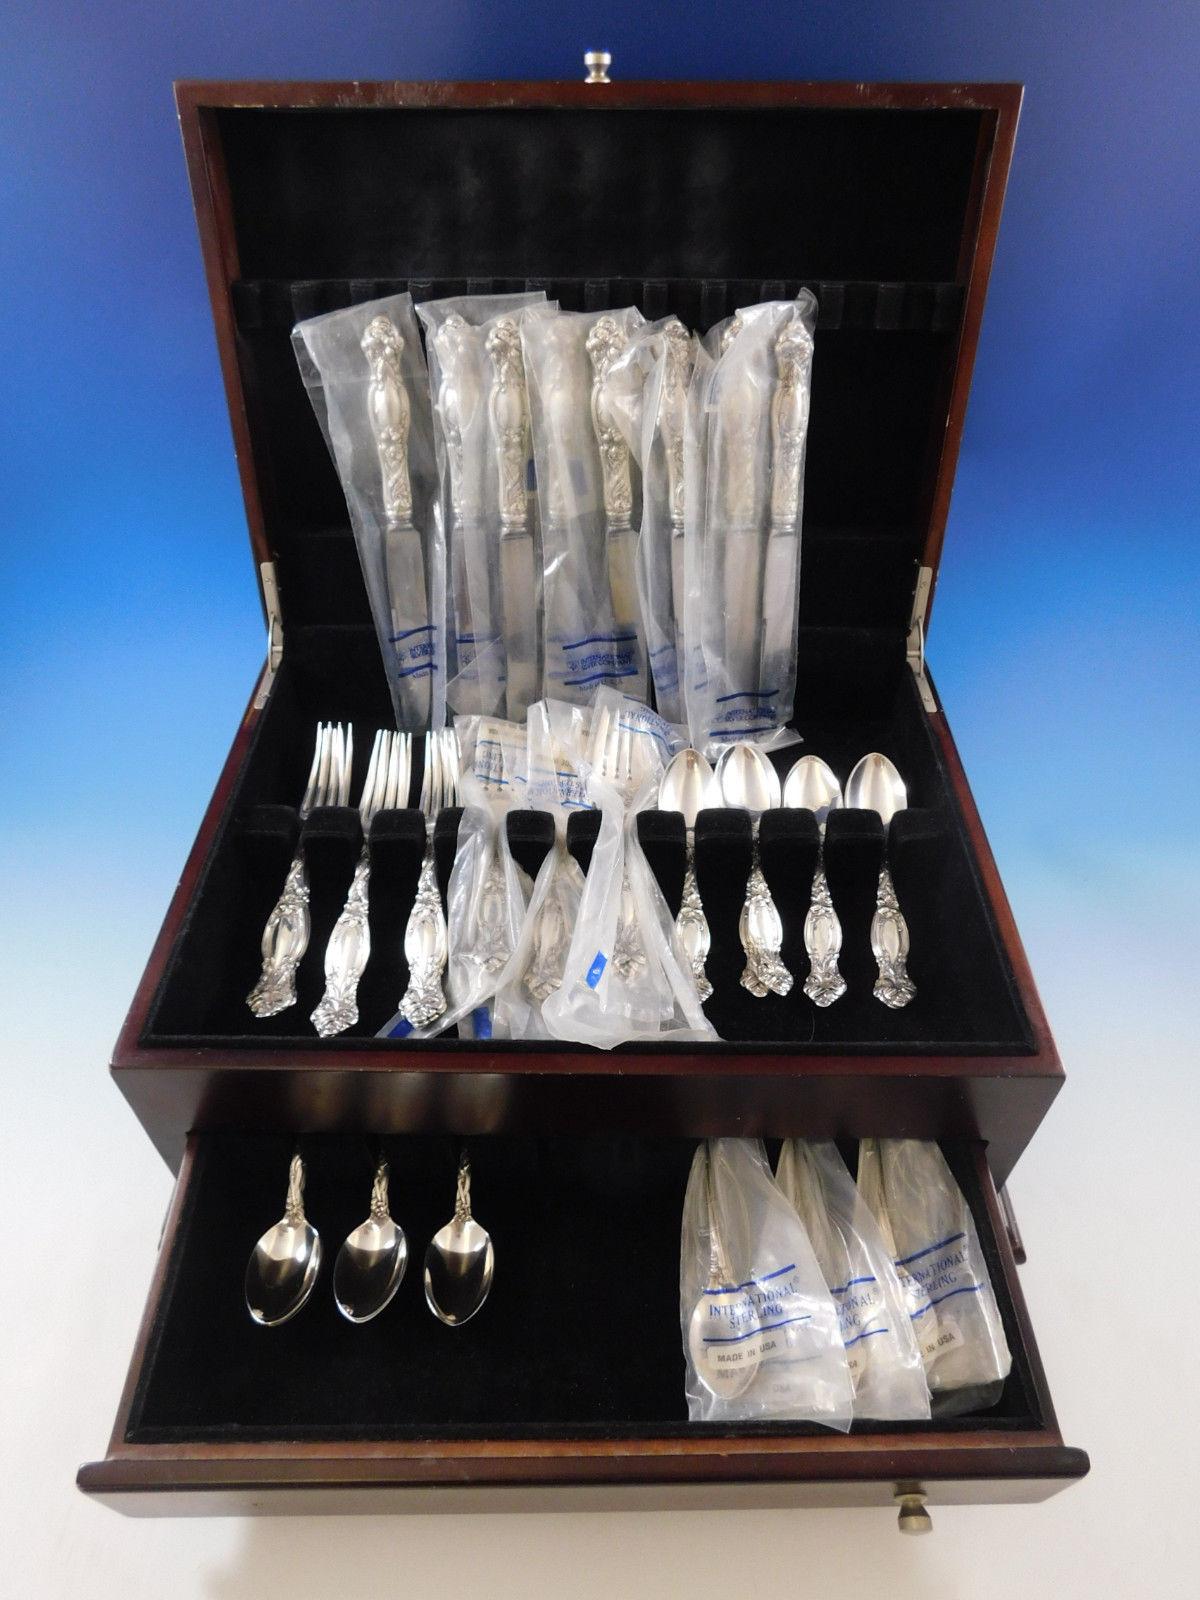 Frontenac by International sterling silver flatware set, 48 pieces. This set includes:

8 knives, 8 7/8